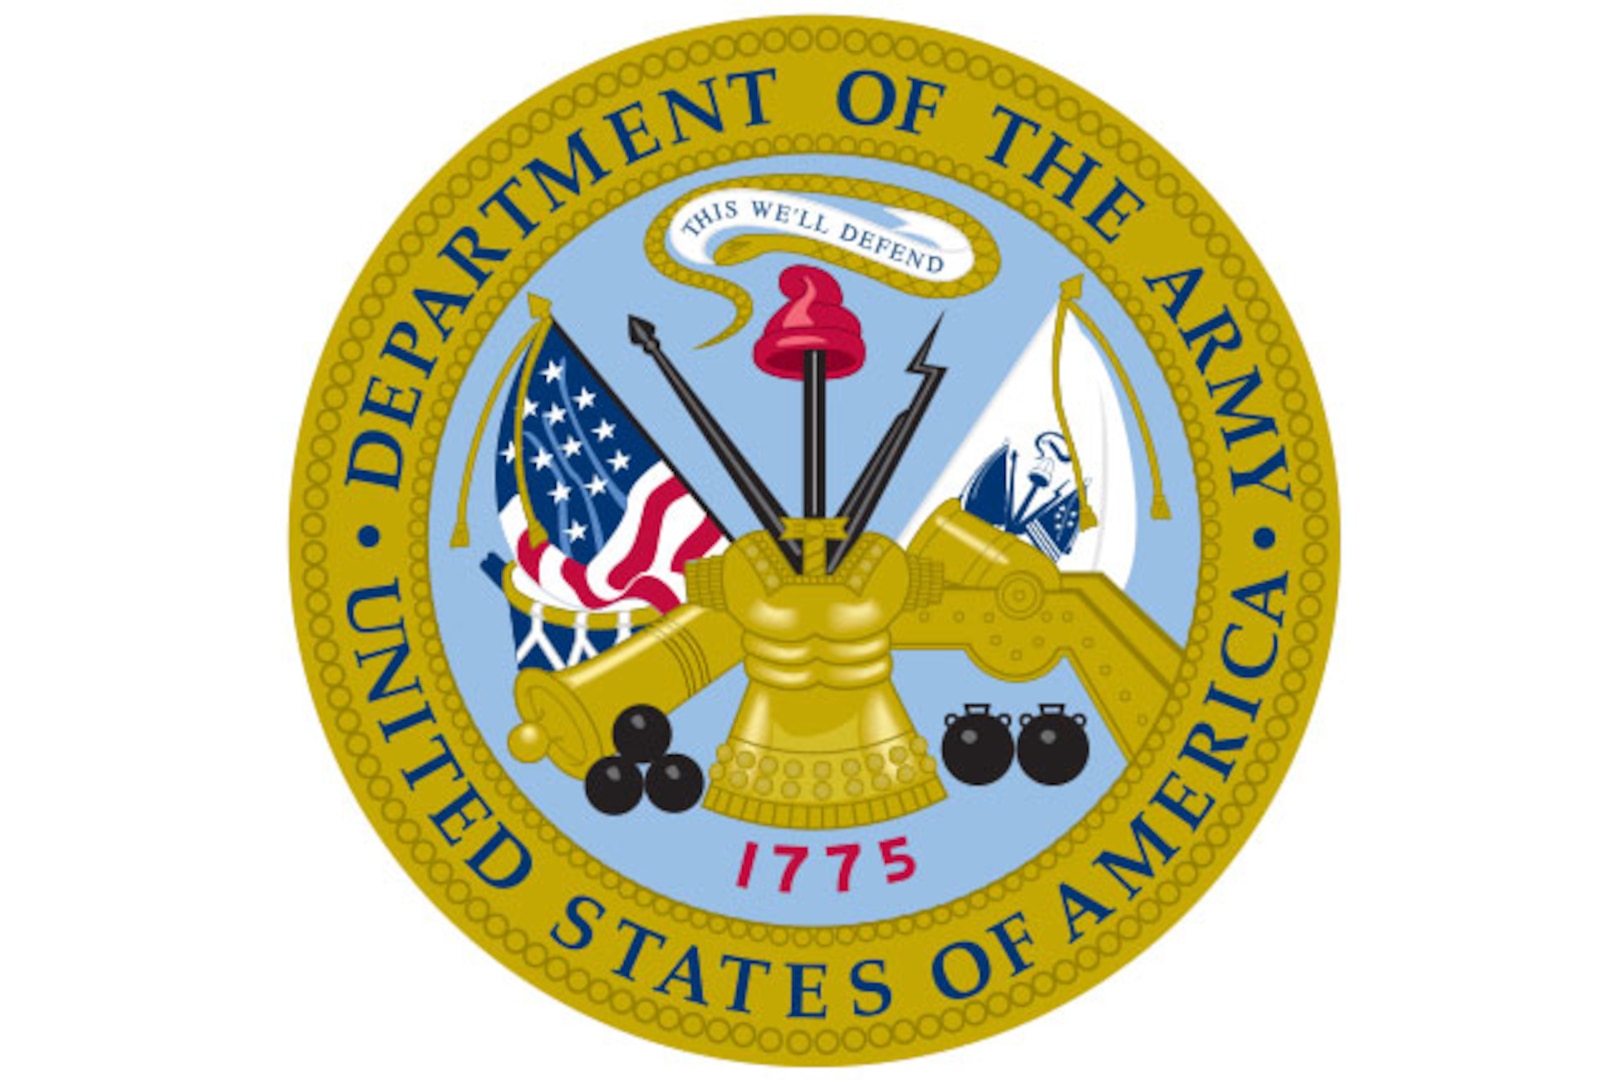 The Department of the Army recently notified the Advisory Council on Historic Preservation (ACHP) of the Army's intent to request a "Program Comment for Army Inter-War Era Historic Housing (1919-1940)" in order to efficiently rehabilitate historic homes while preserving their historical integrity.